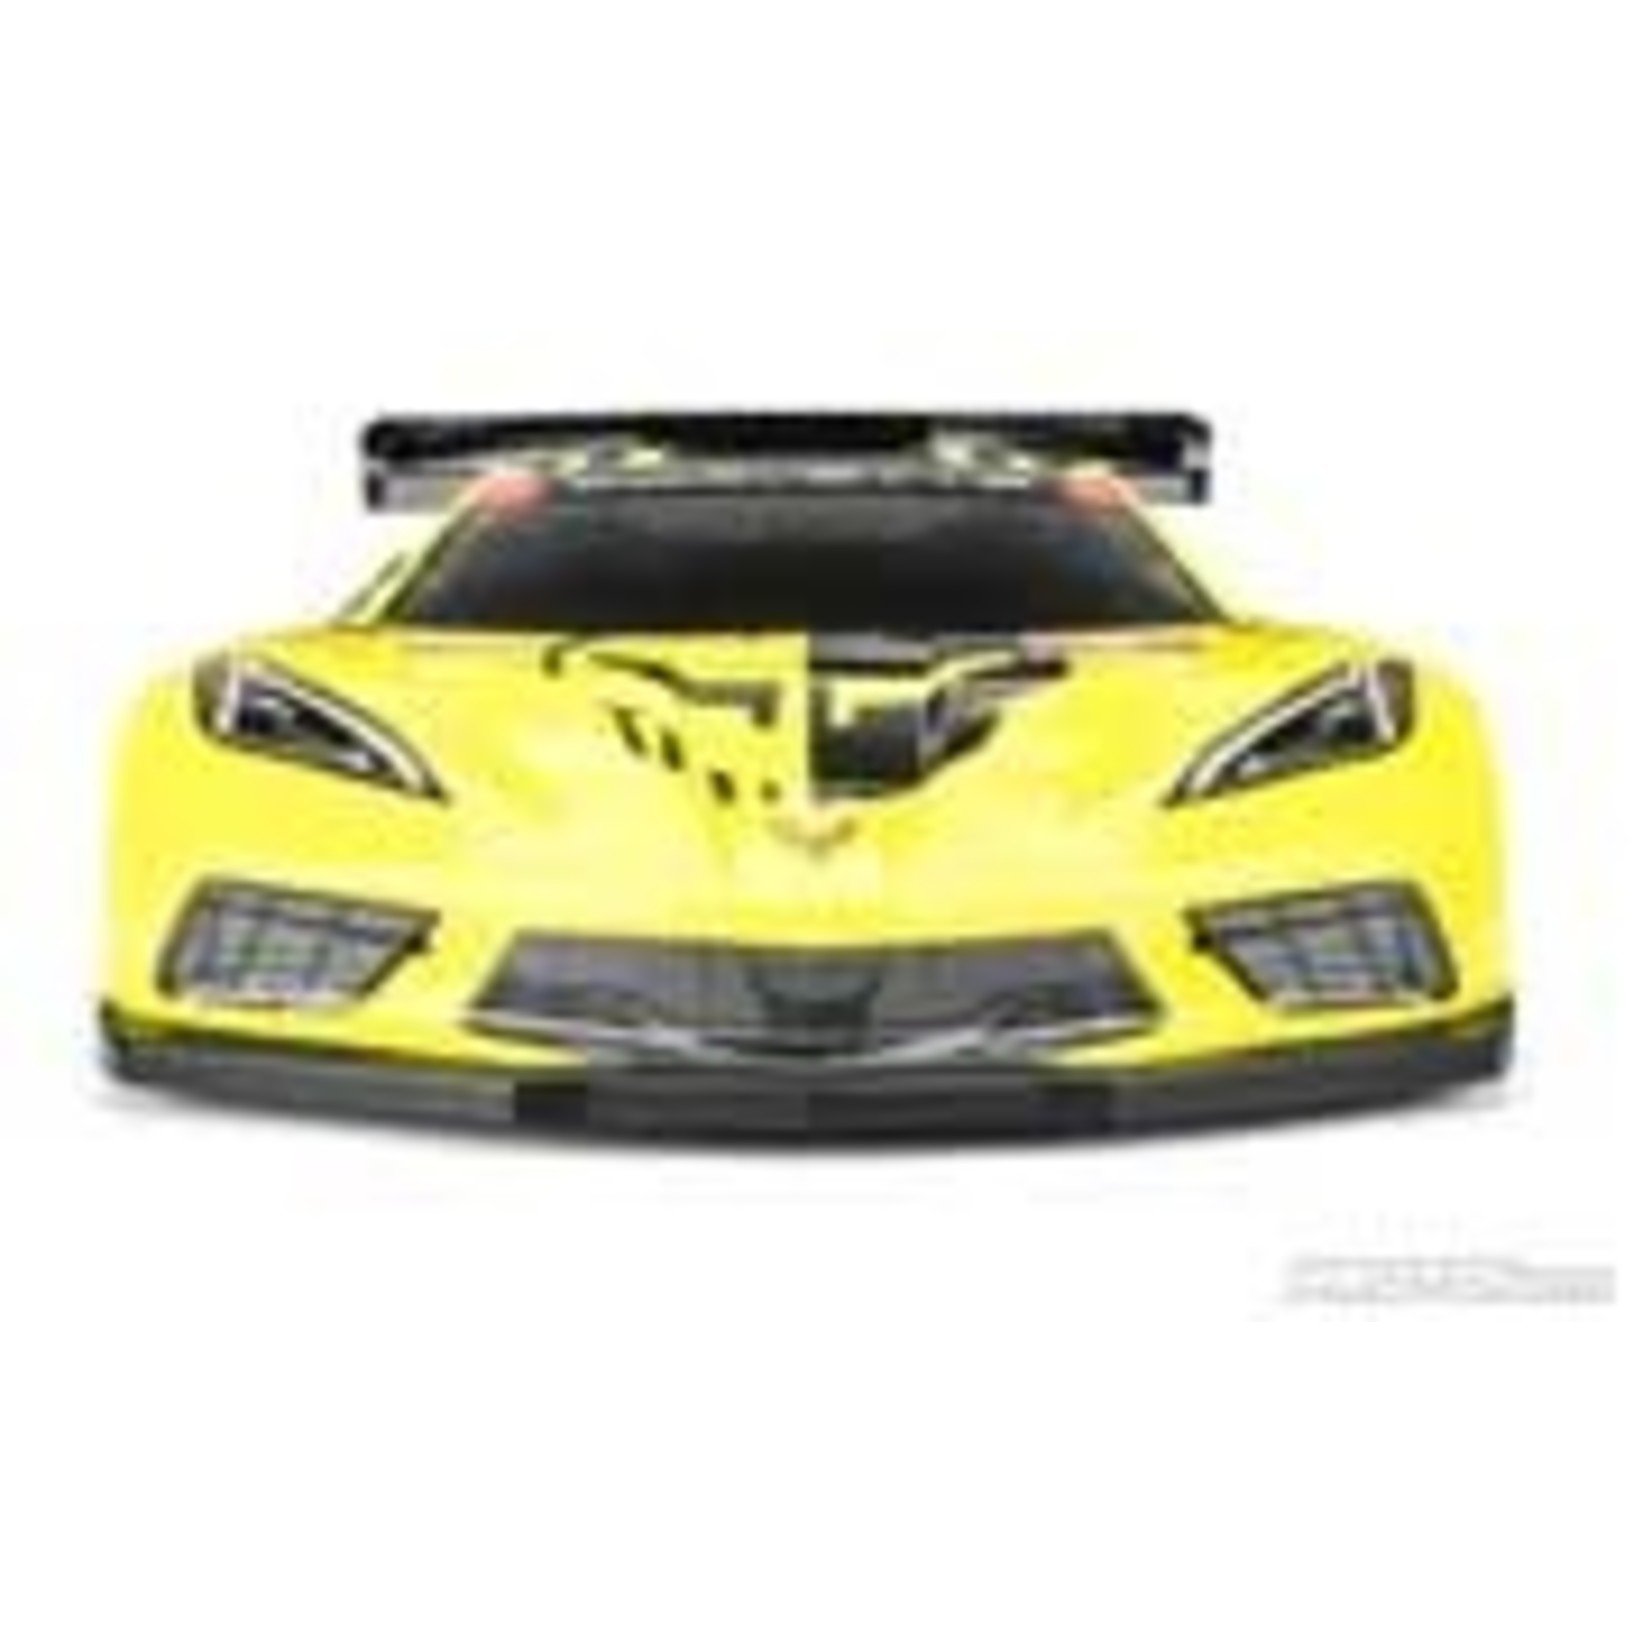 PROTOform item_description Chevrolet Corvette C8 Clear Body for GT12  From the moment rumors surfaced that Chevy was reinventing the legendary Corvette into a mid-engine supercar all of us at PROTOform were waiting with bated breath to see what our future GT raci